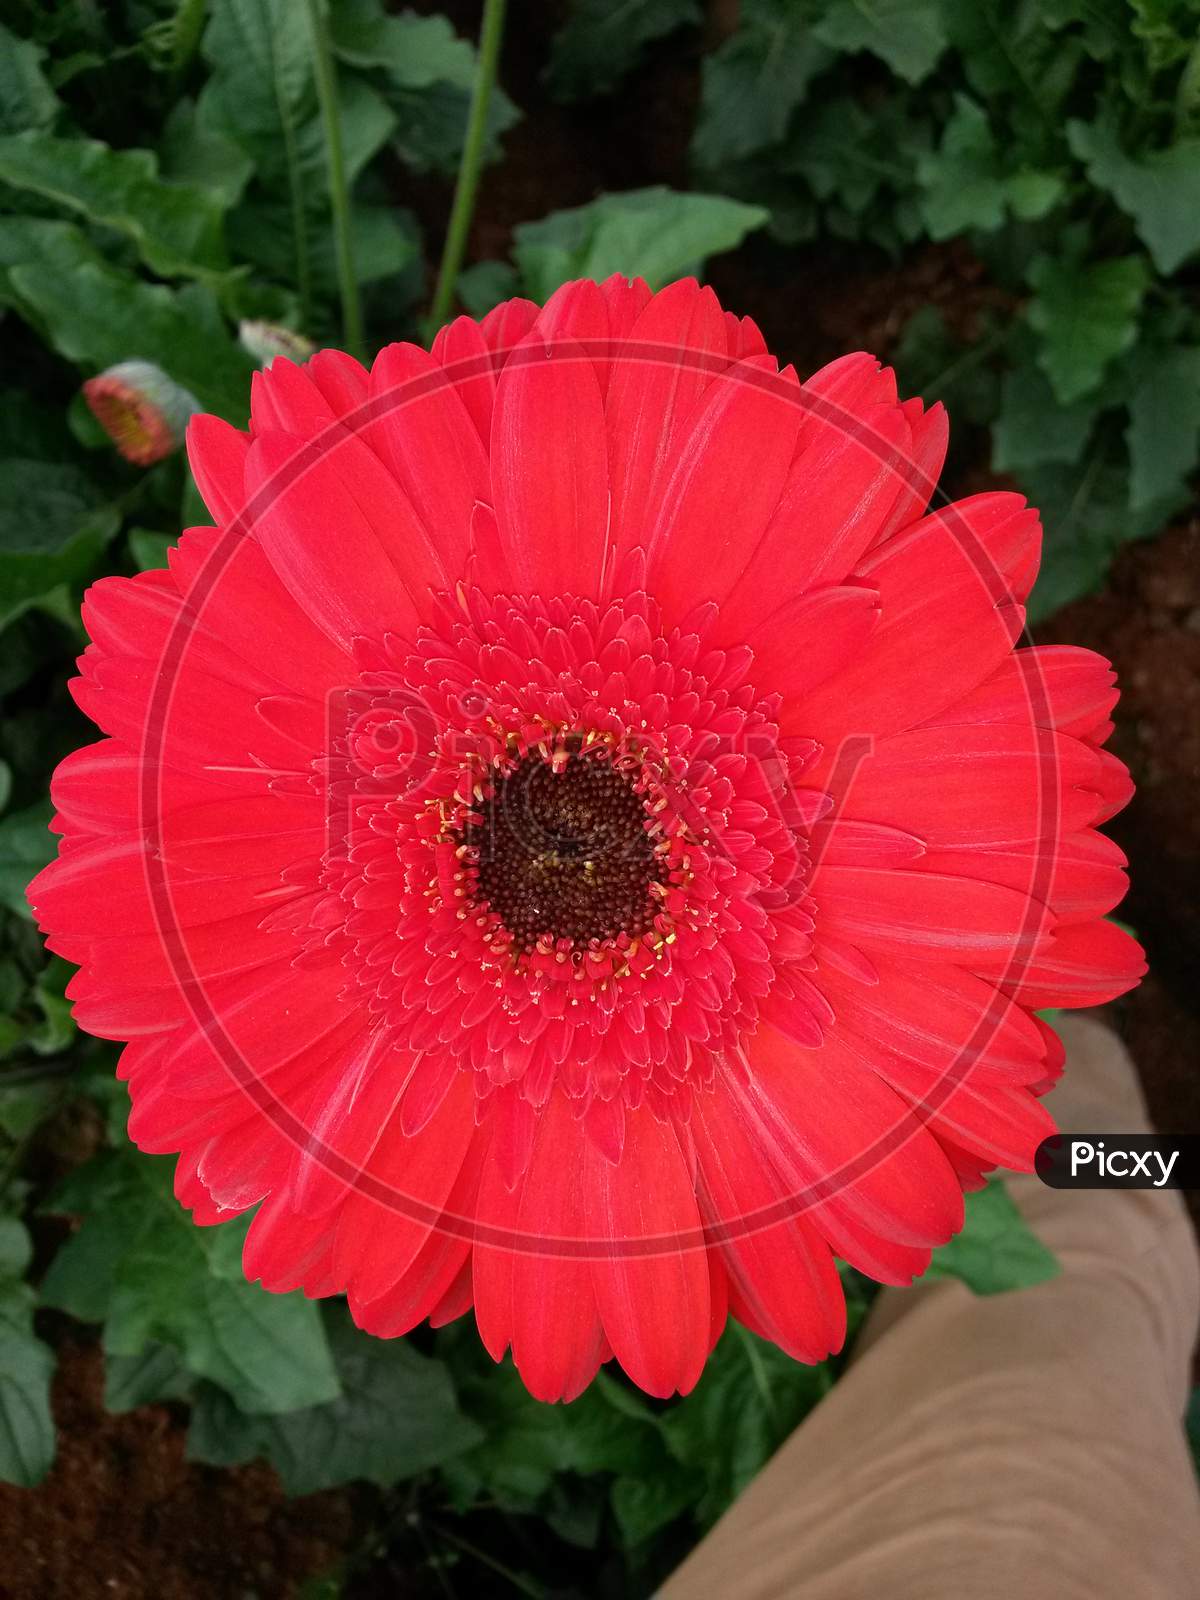 Red Gerbera Flower With Black Core